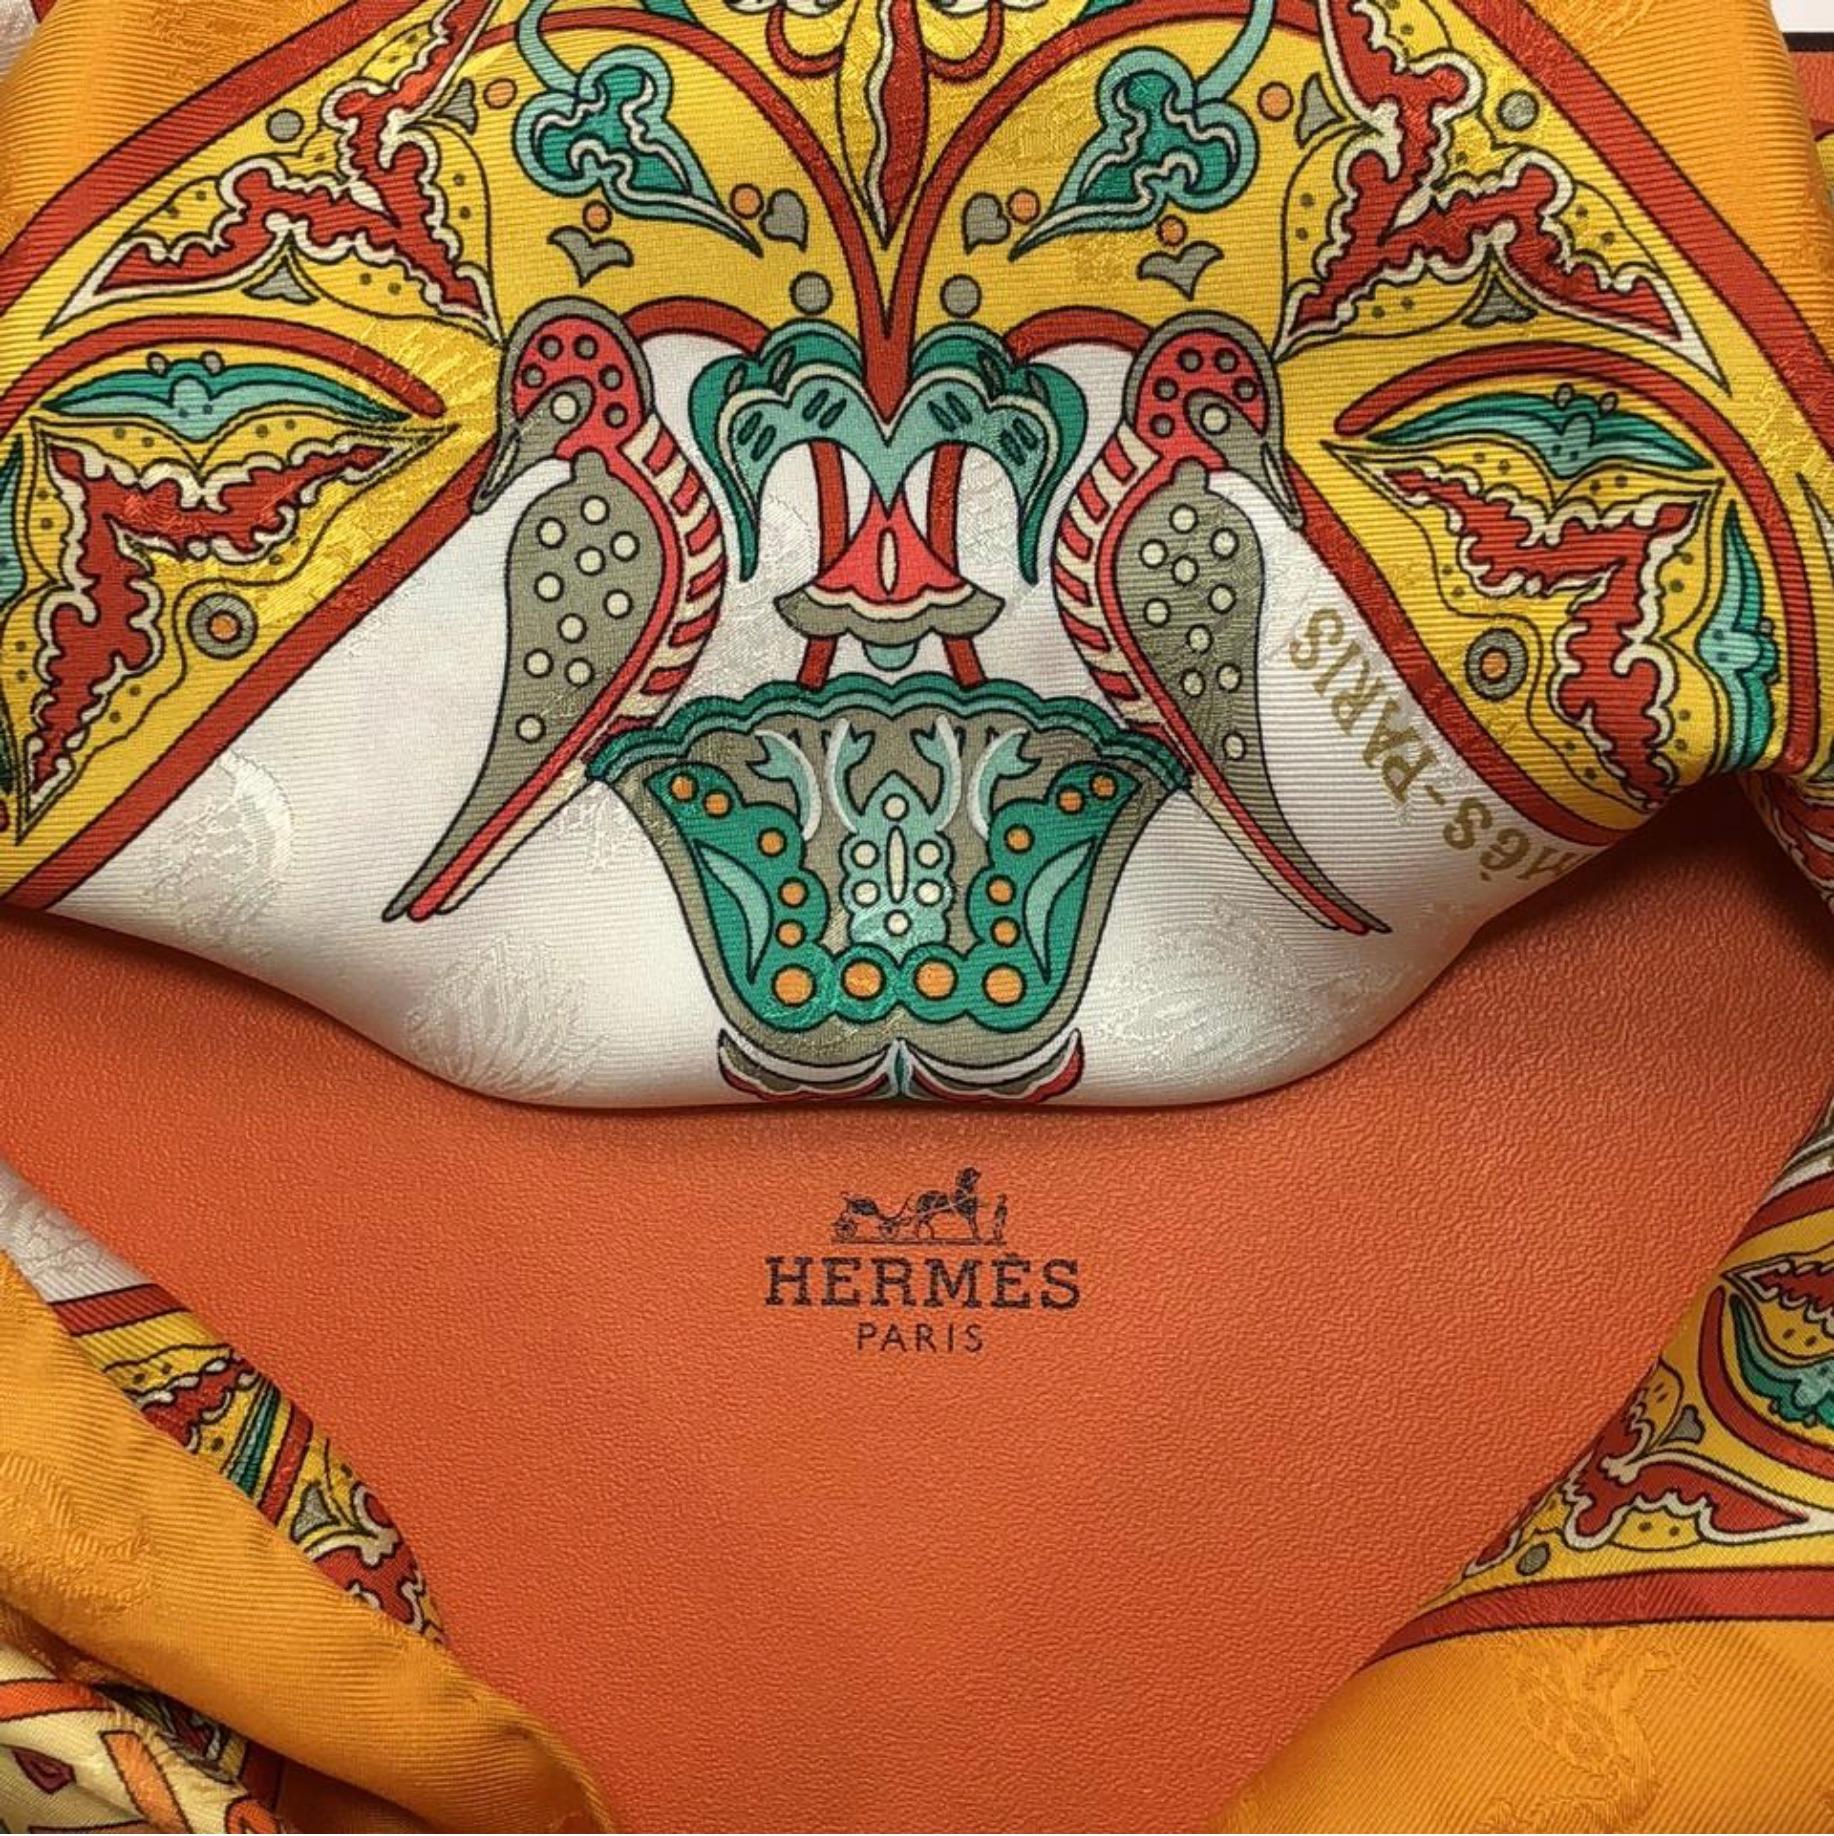 MODEL - Hermes Scarf Ciels Byzantins Silk in Orange

CONDITION - Very Good. A couple of very light spots.

SKU - 2773

DATE/SERIAL CODE - NA

ORIGIN - France

PRODUCTION - NA

DIMENSIONS - L35 x H35 x D.05

STRAP/HANDLE DROP - NA

MATERIAL - 100%